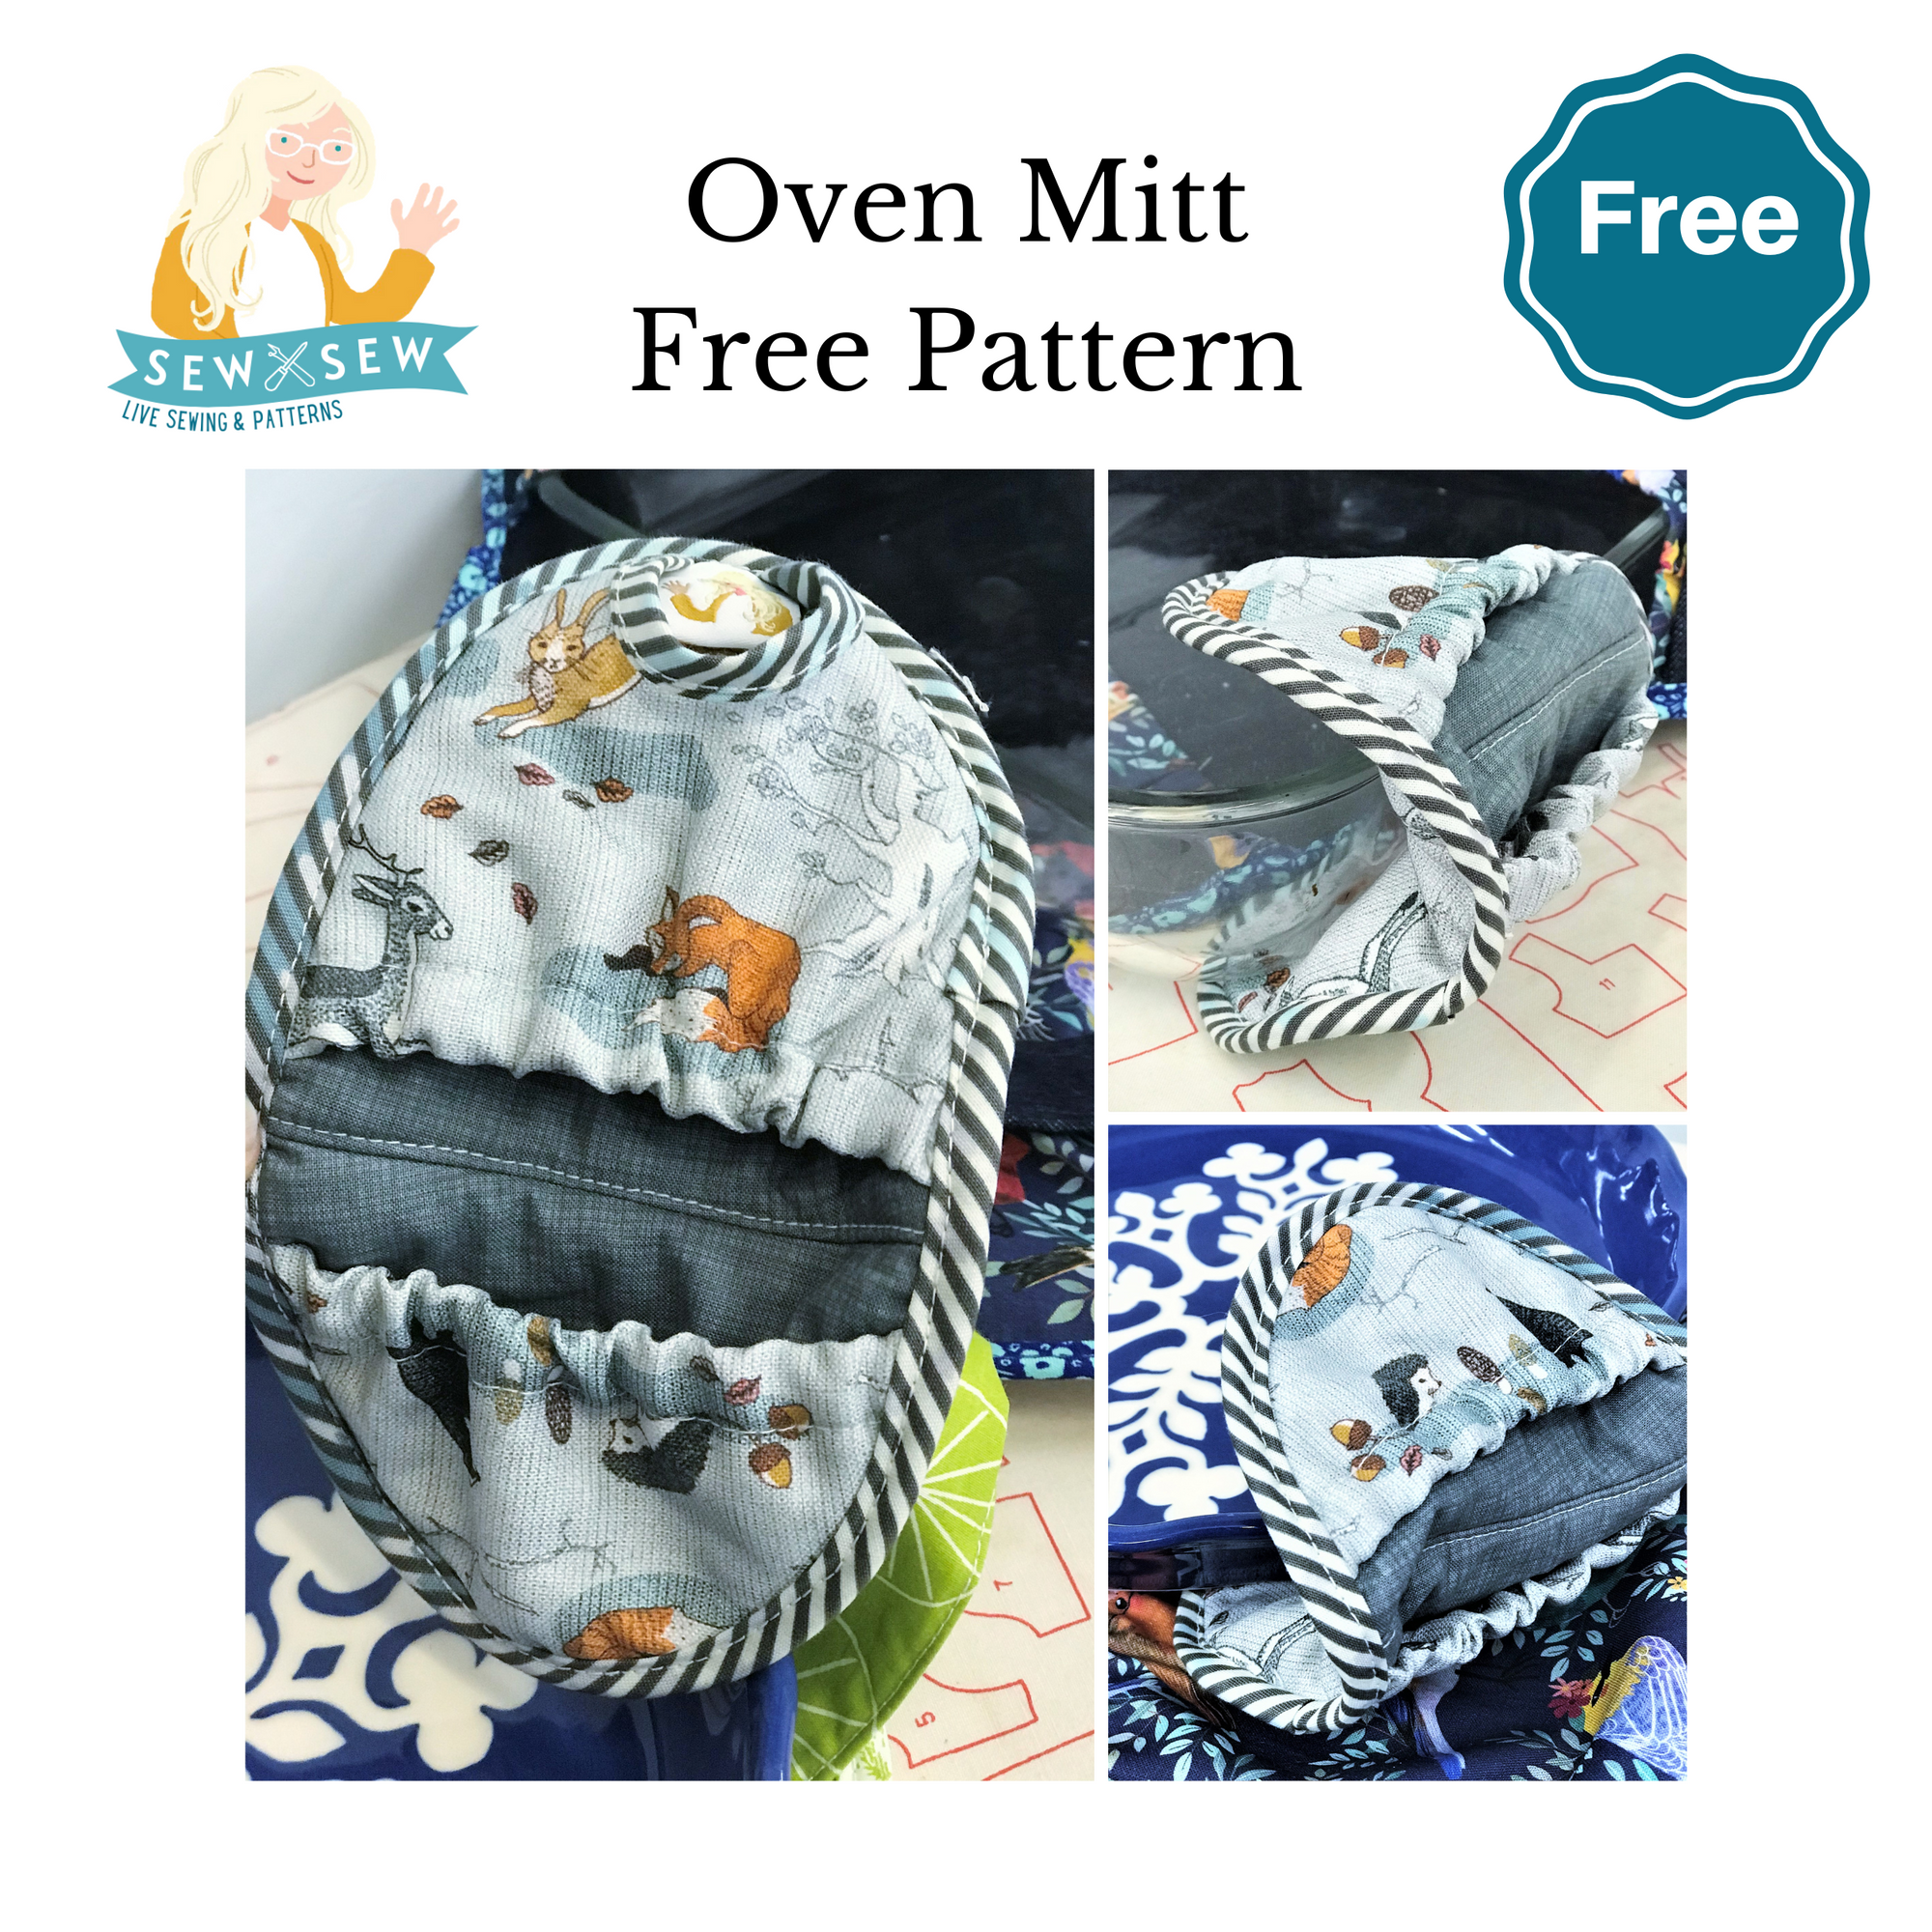 Oven Mitt Free Pattern And Sewing Videos